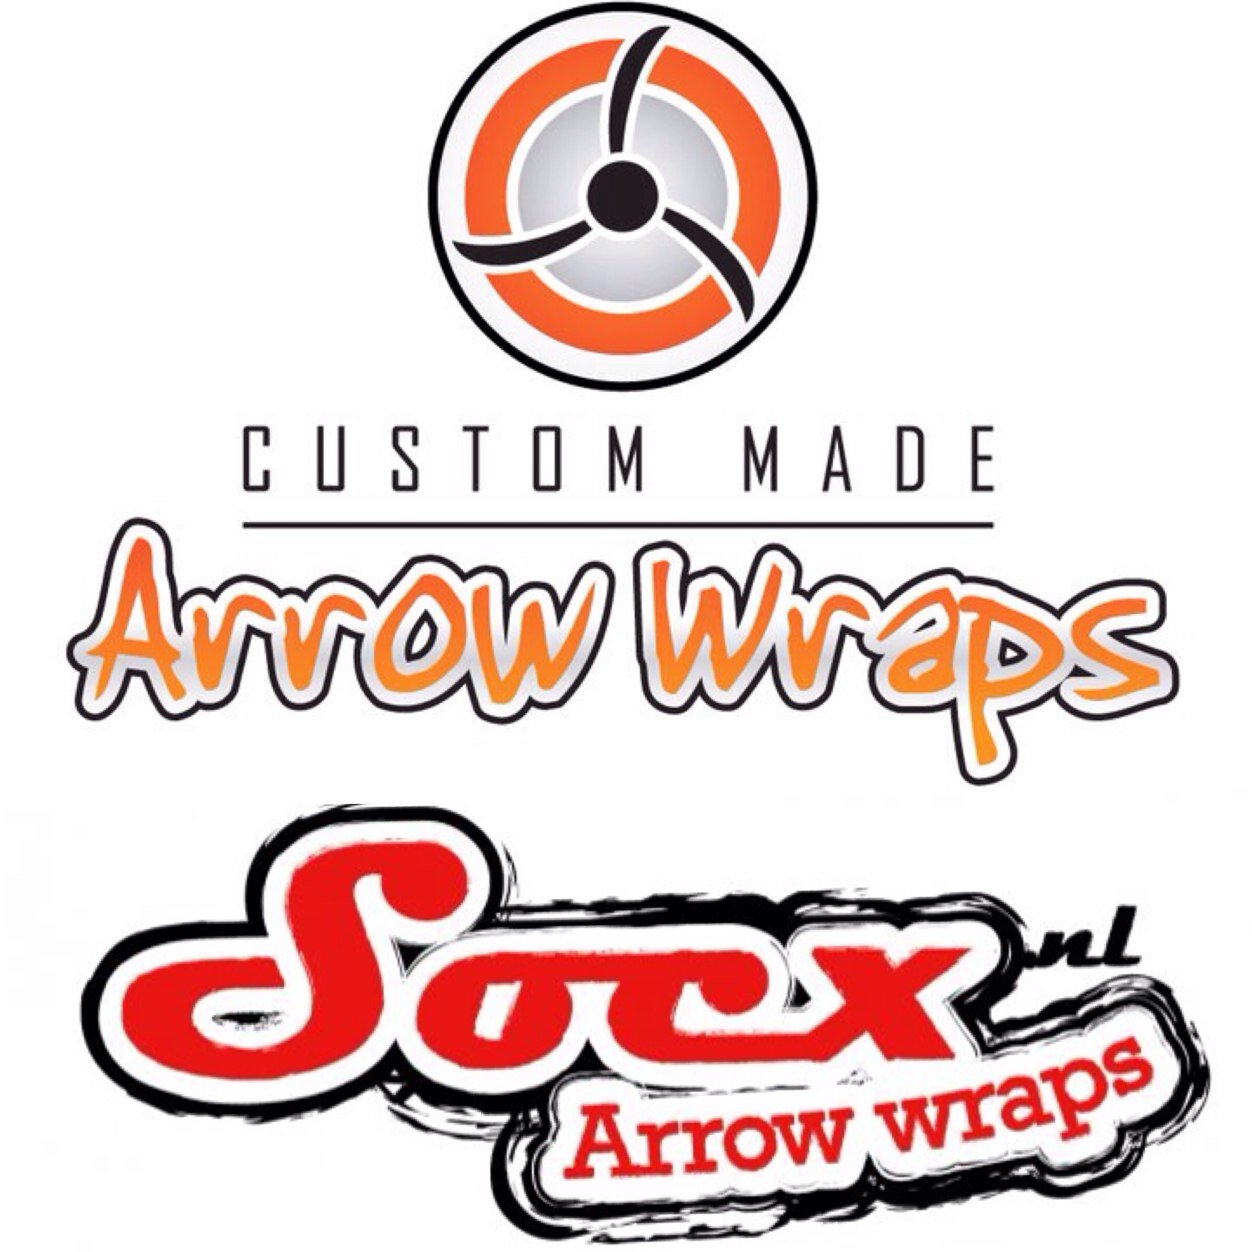 Custom made arrow wraps that are exactly made for your arrow shafts. We also supply socx.nl wraps at your archery dealer through JVD distribution.